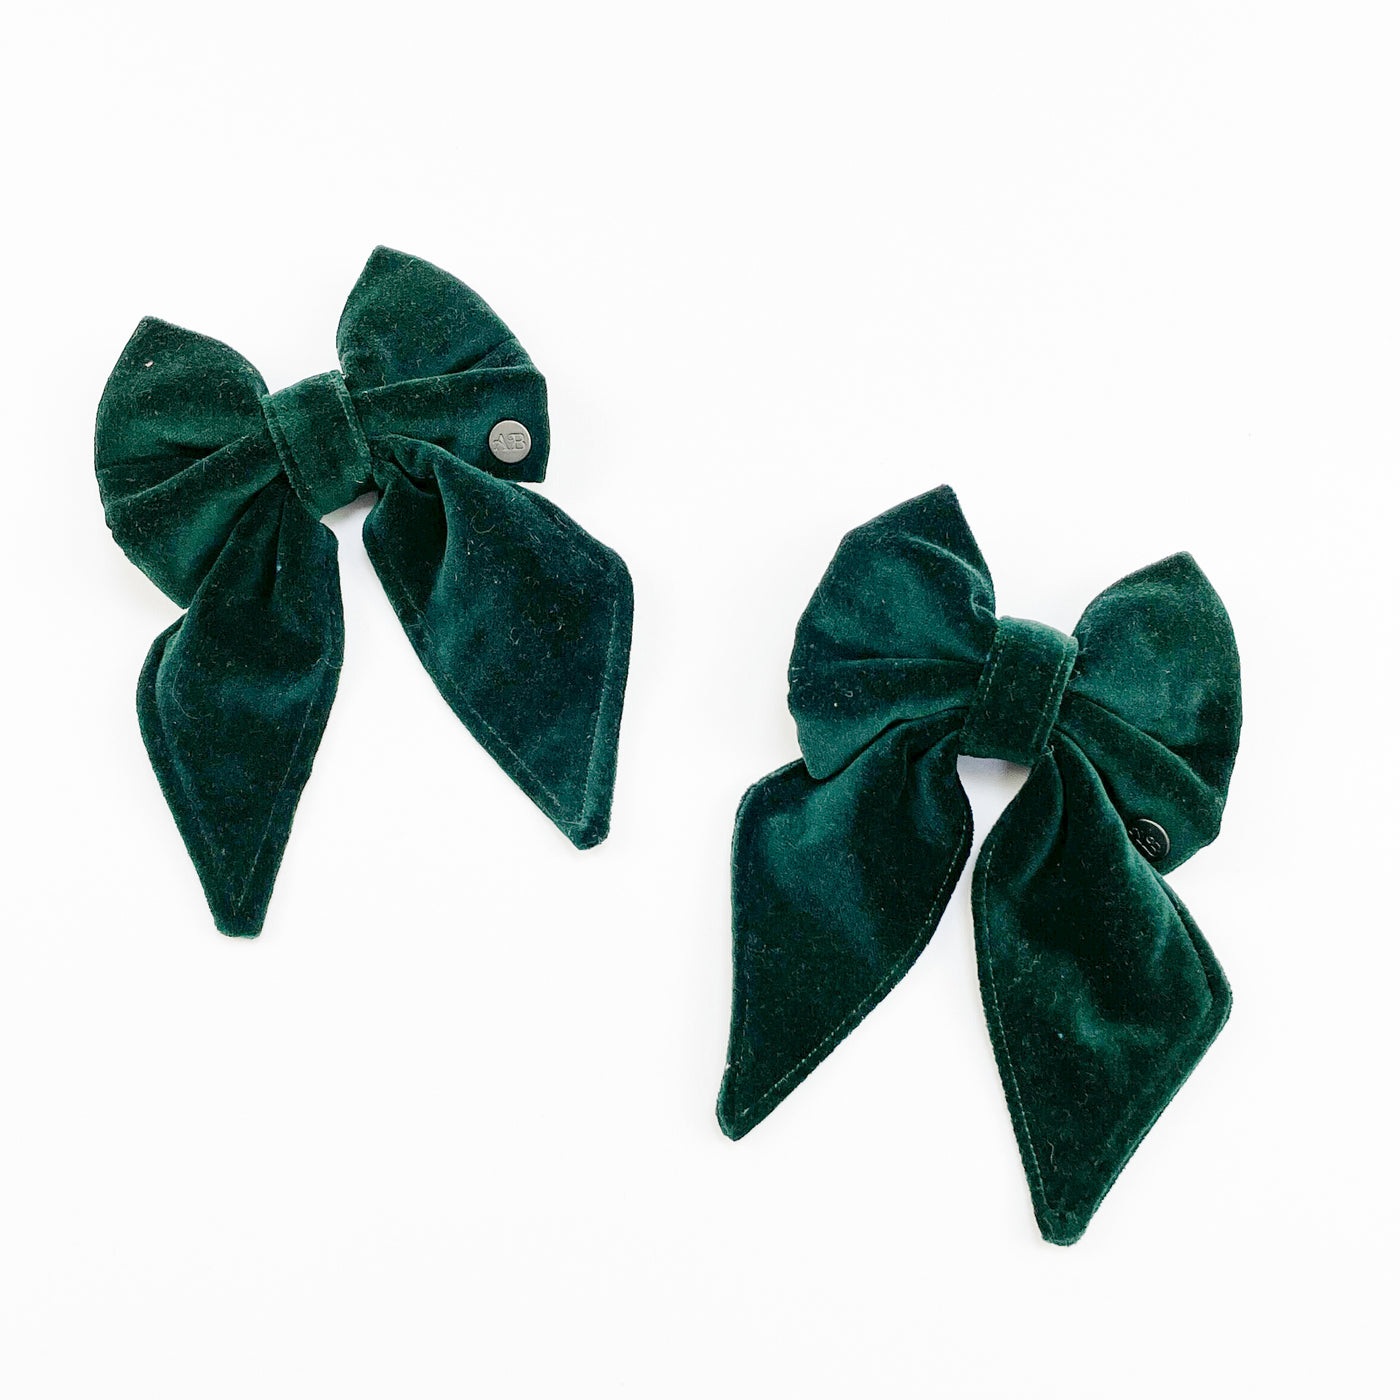 Luxury Emerald Green Velvet Sailor Bows available in two sizes.